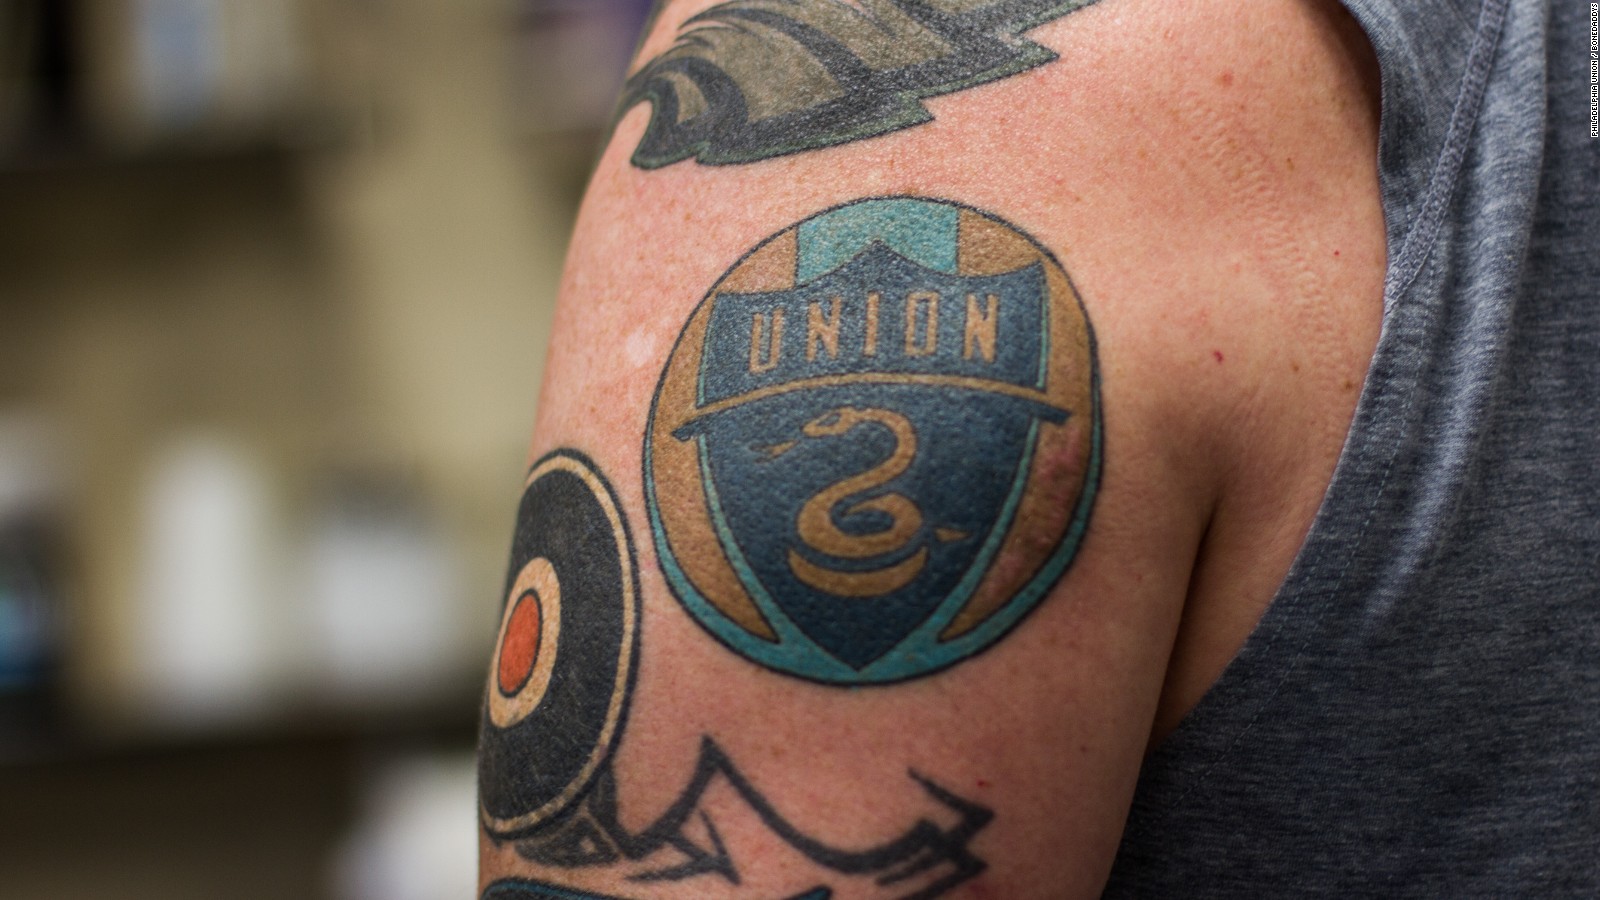 Mls Philadelphia Union Hires Chief Tattoo Officer To Ink Players